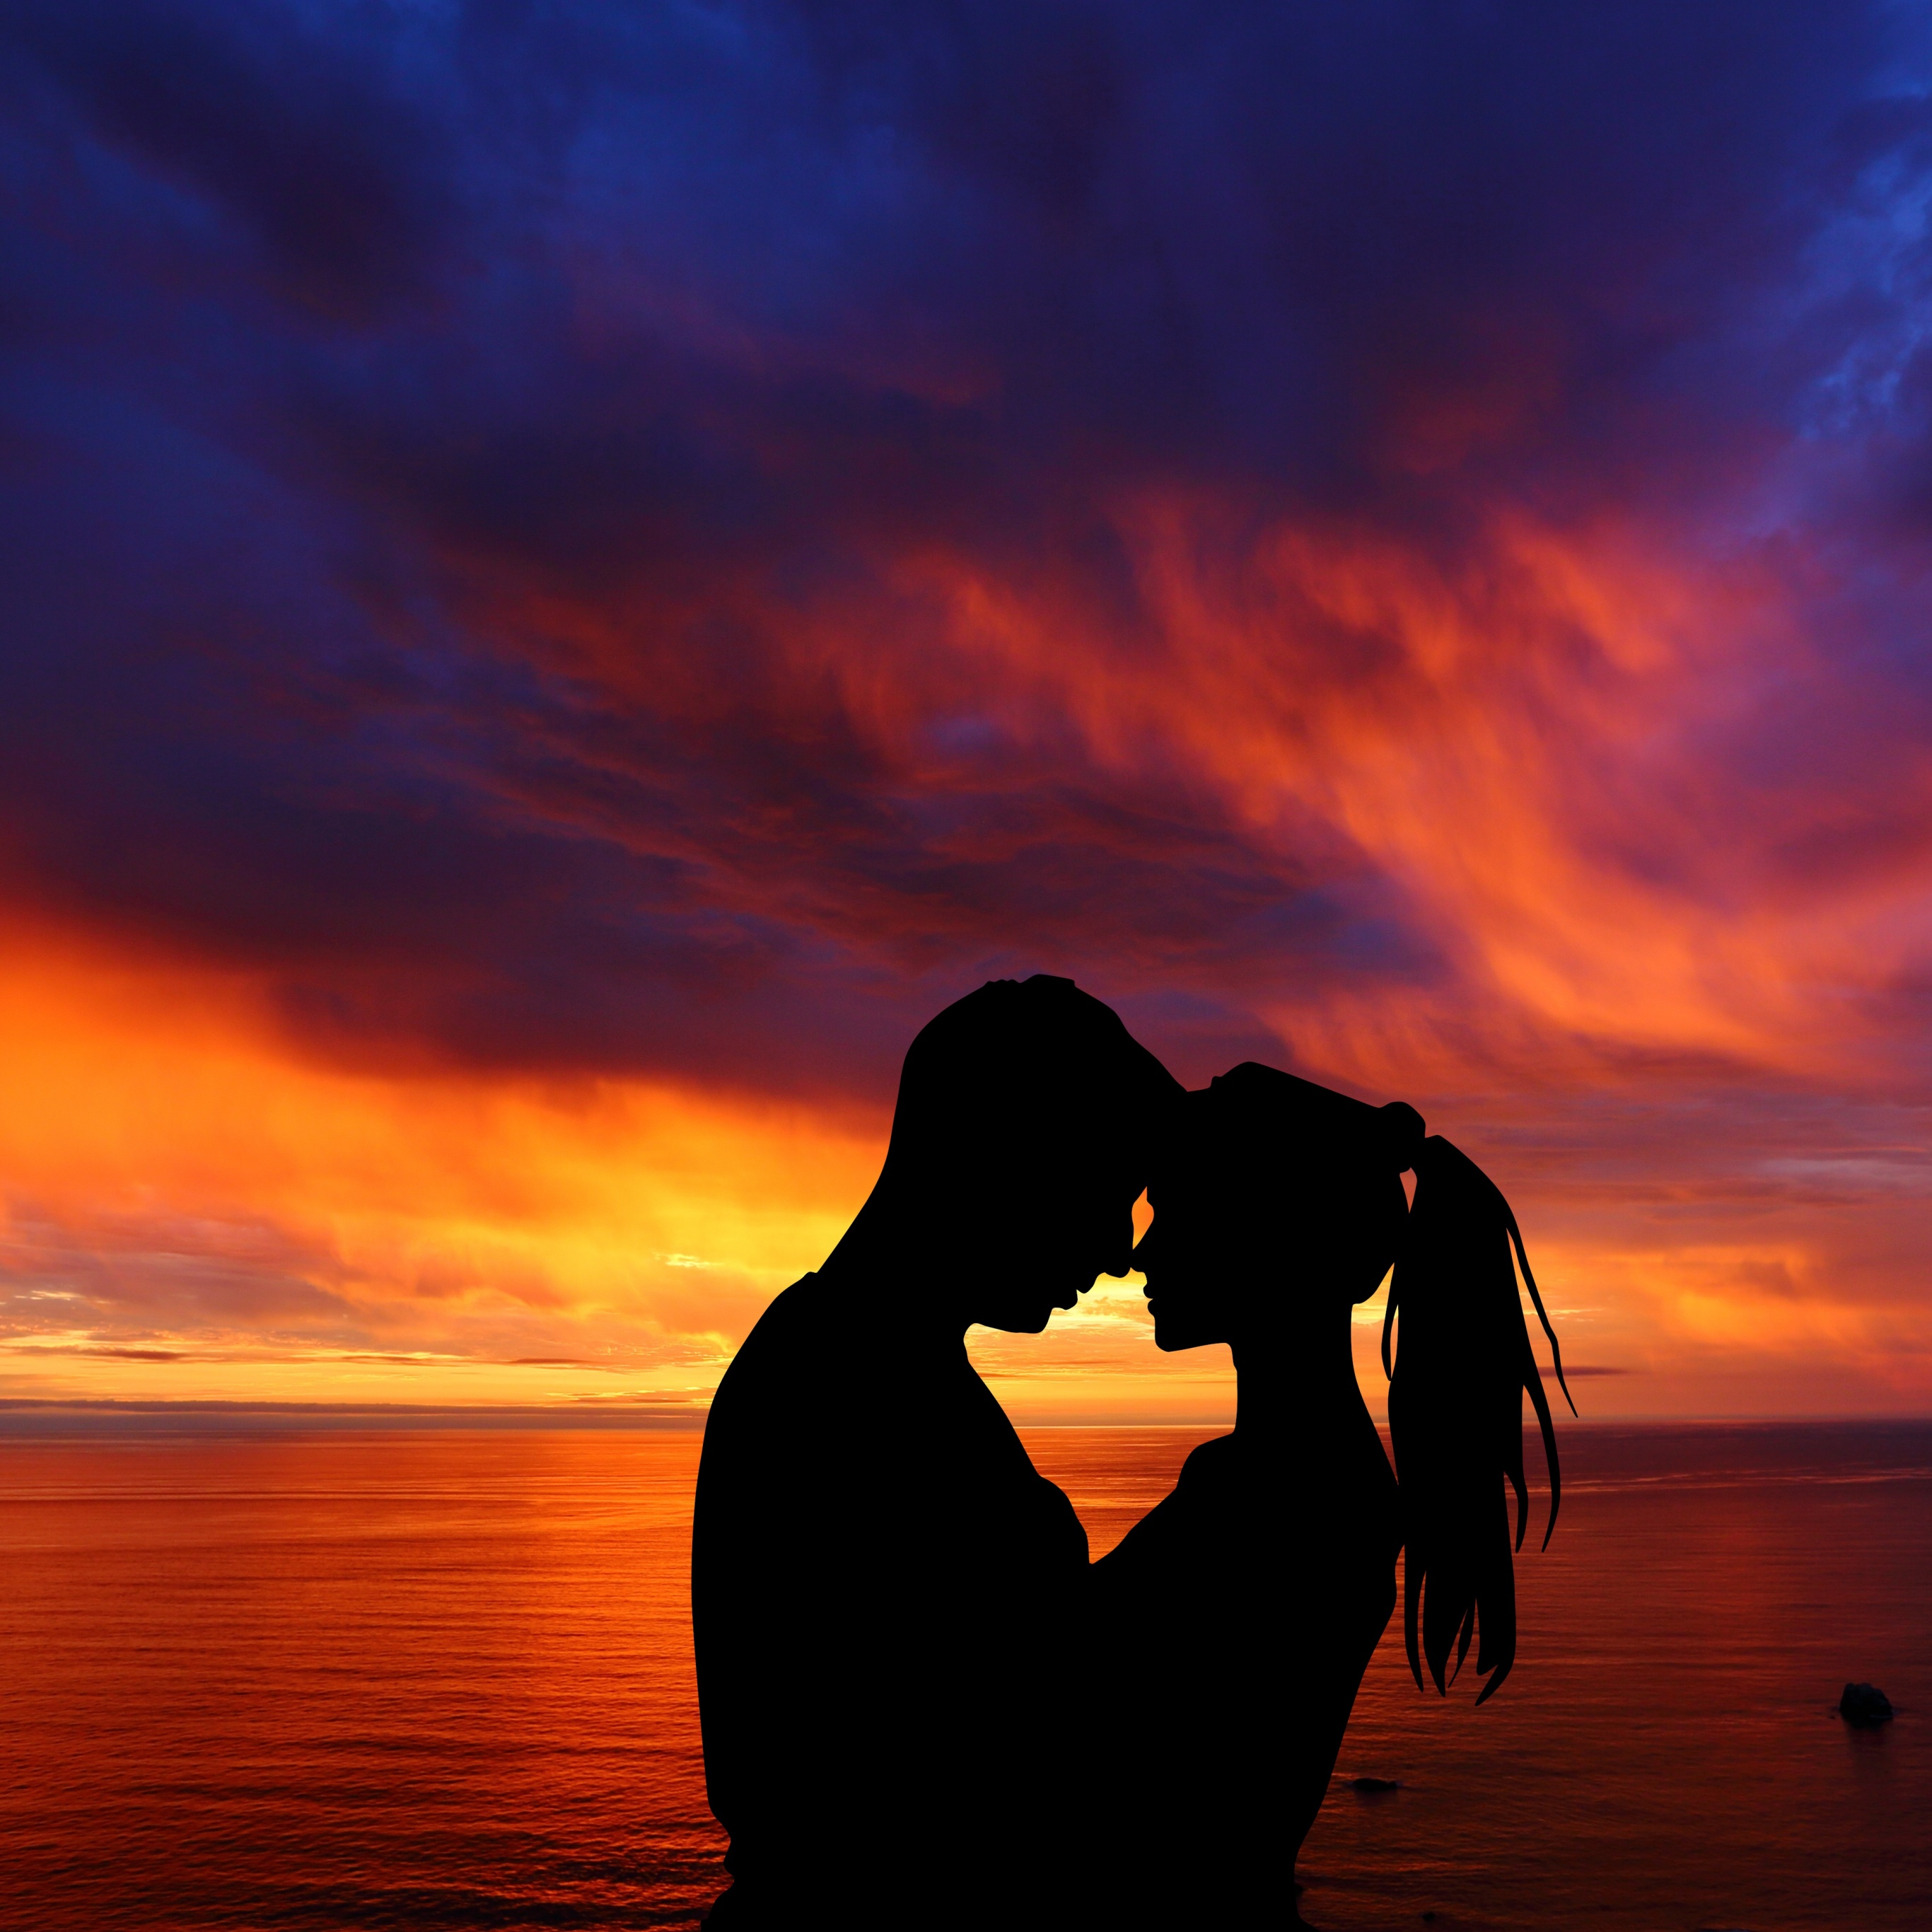 Albums 97 Wallpaper Couples On The Beach At Sunset Latest 